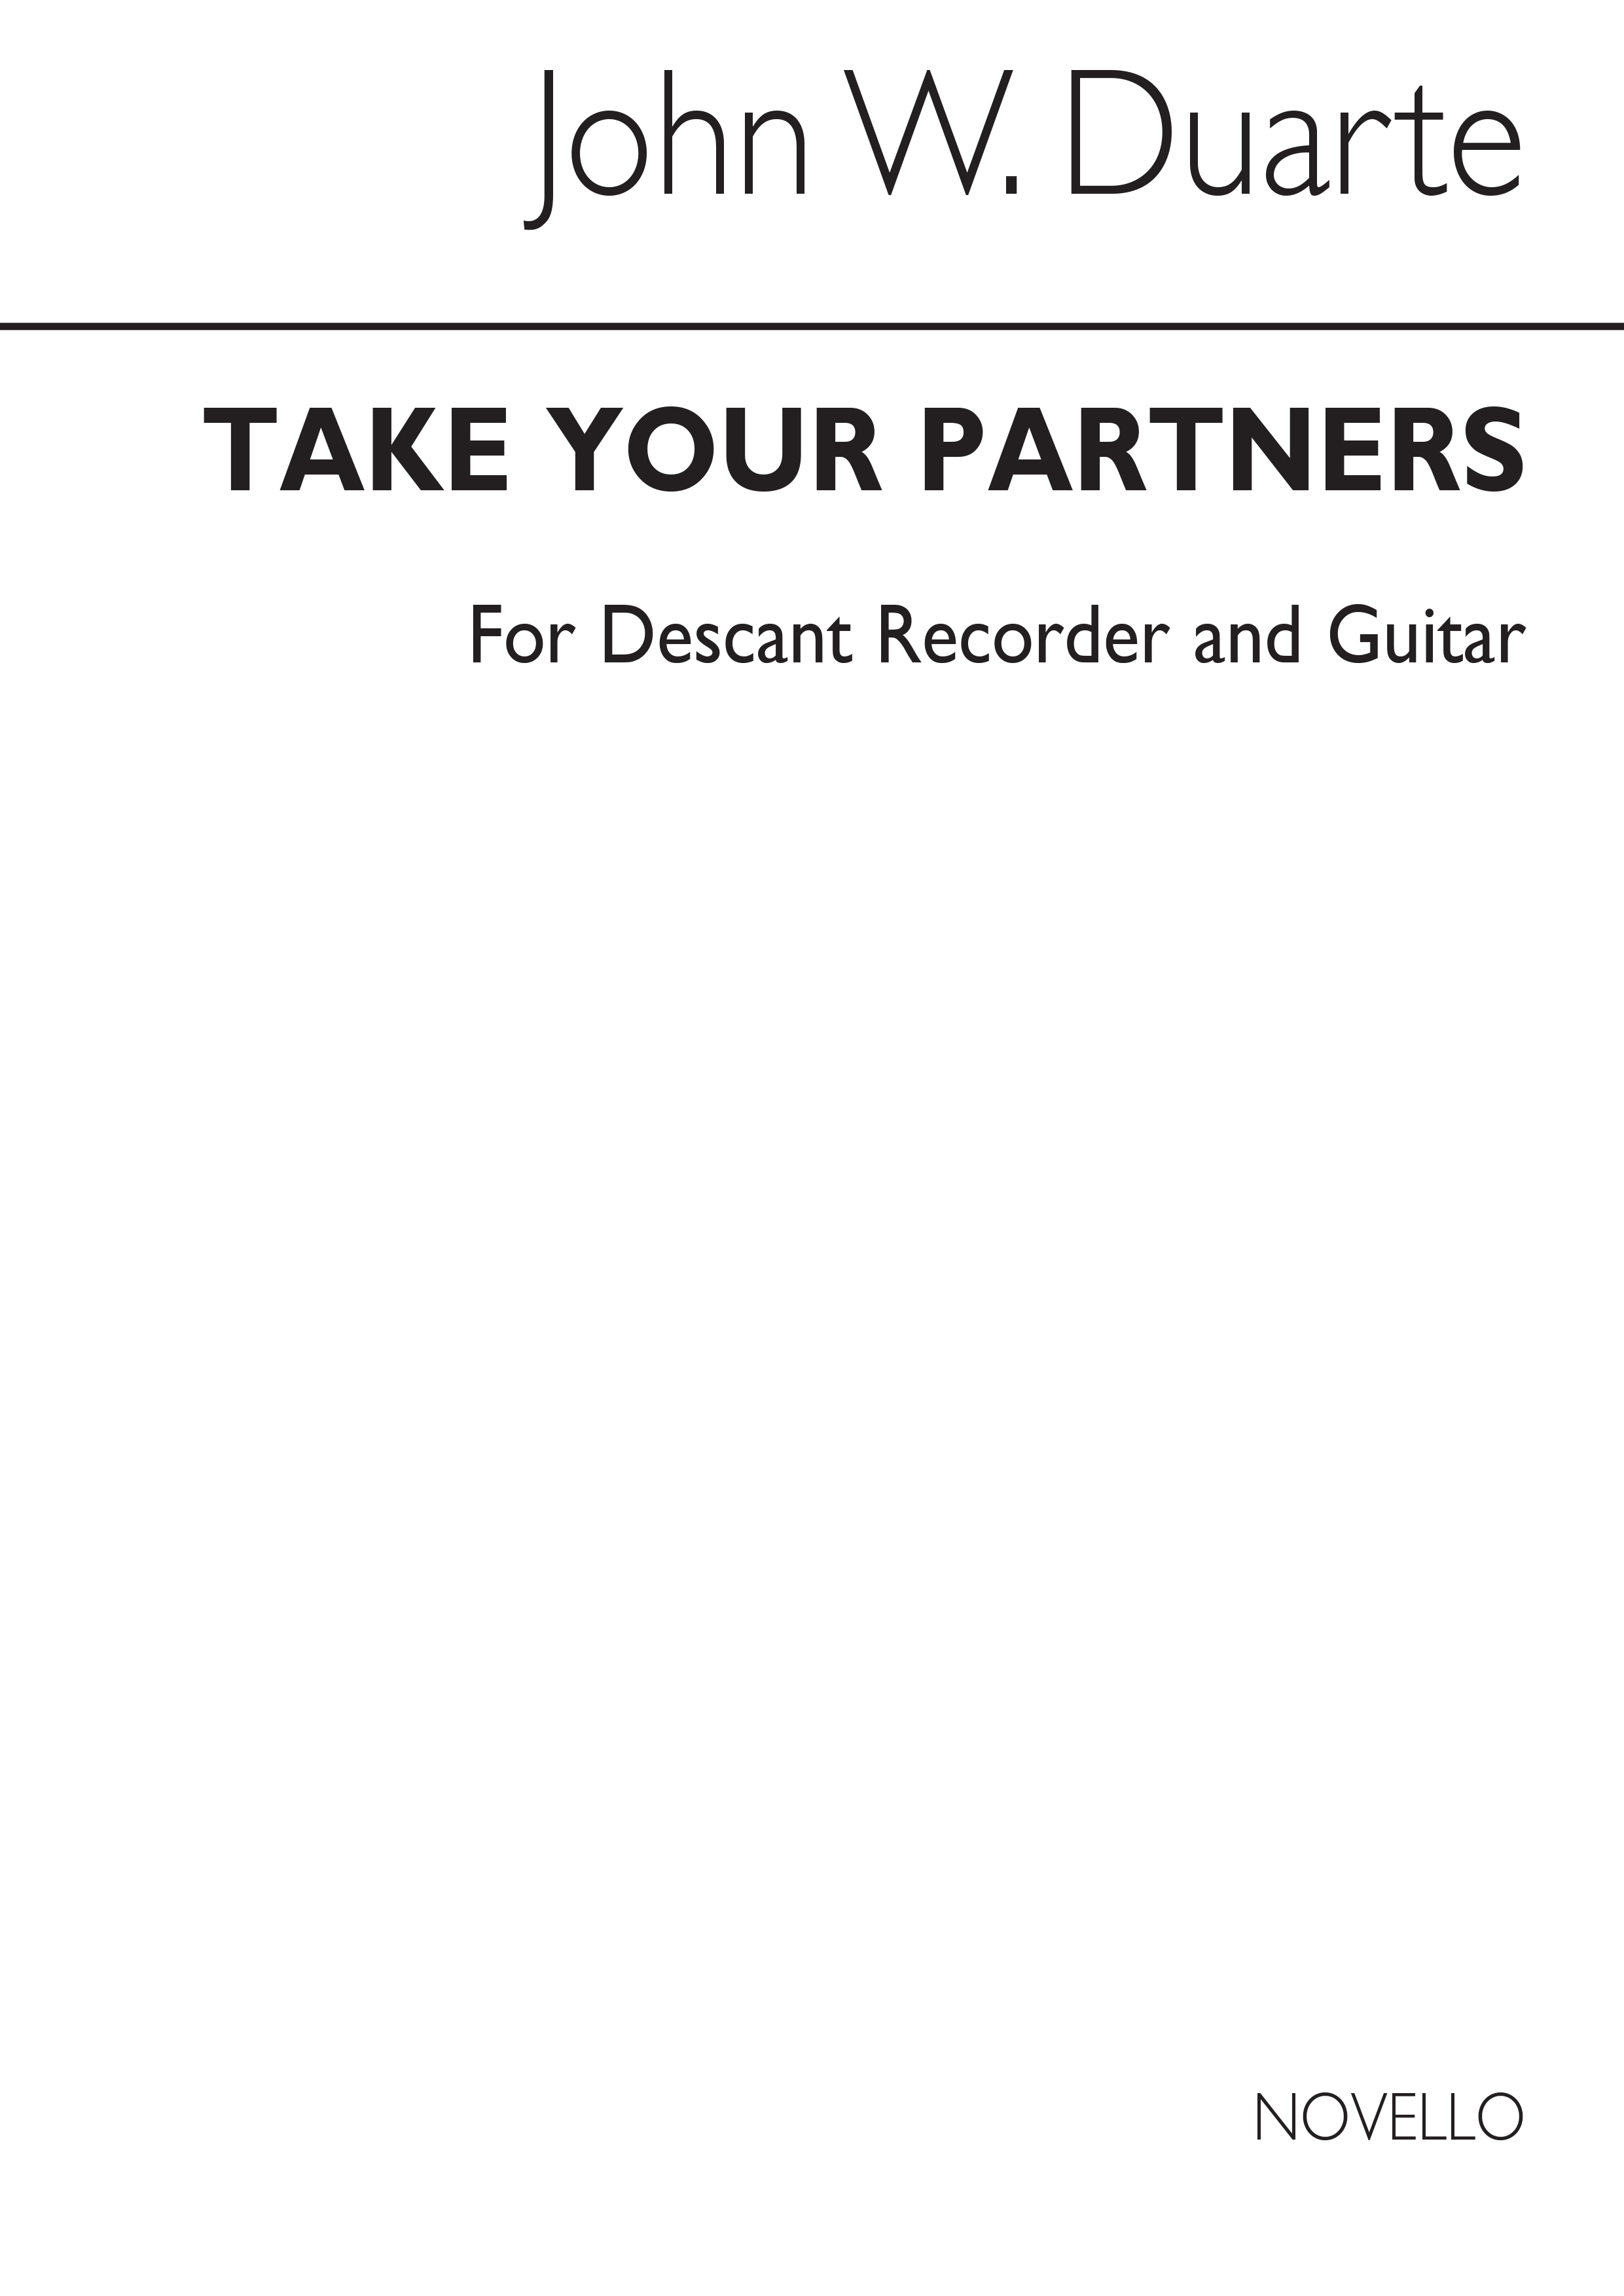 John W. Duarte: Take Your Partners for Descant Recorder and Guitar: Descant